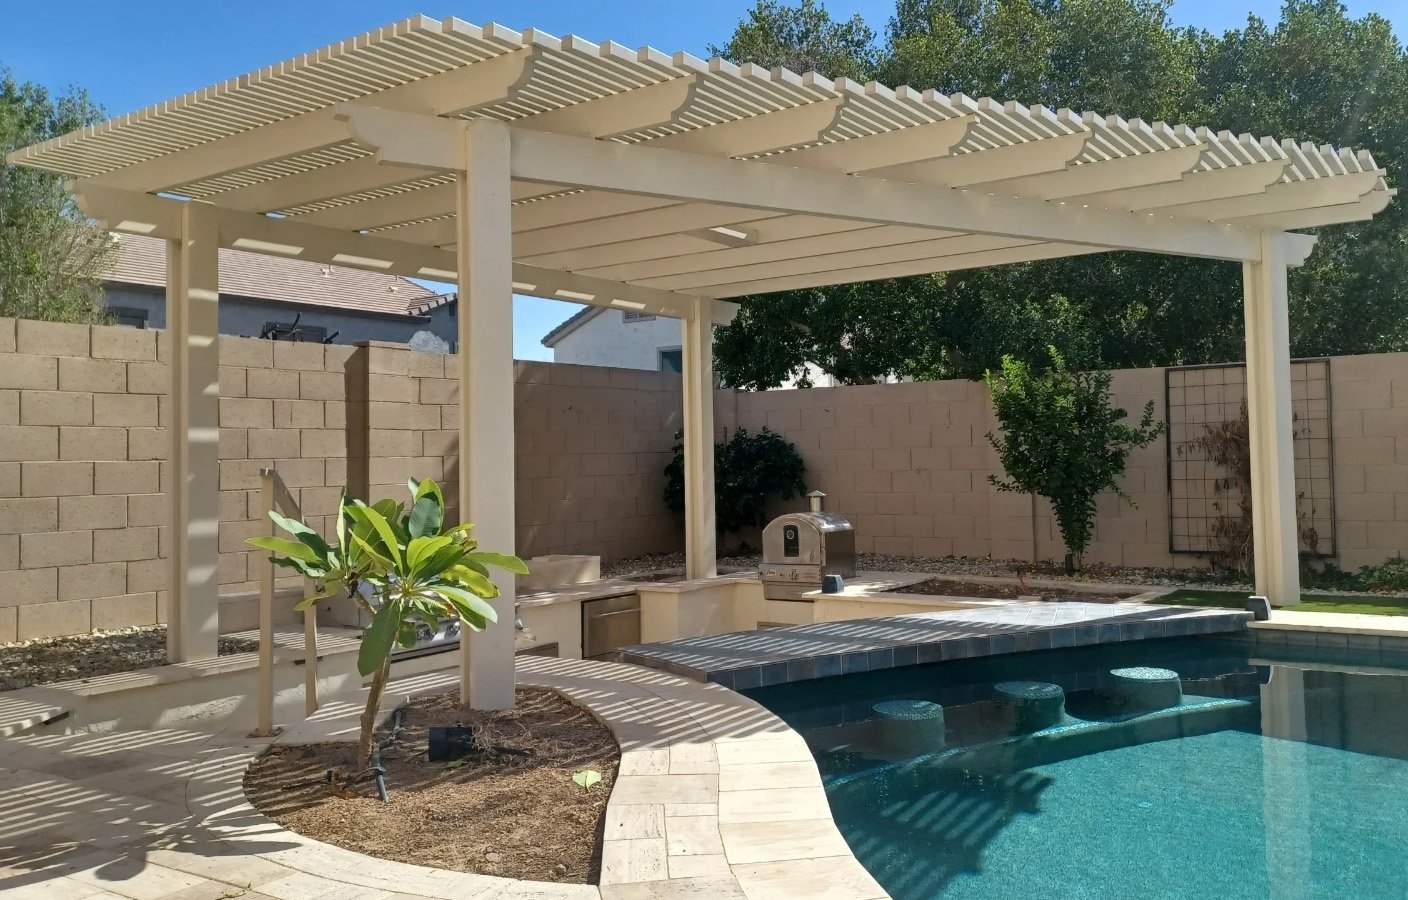 Alumawood Patio Covers Pros and Cons